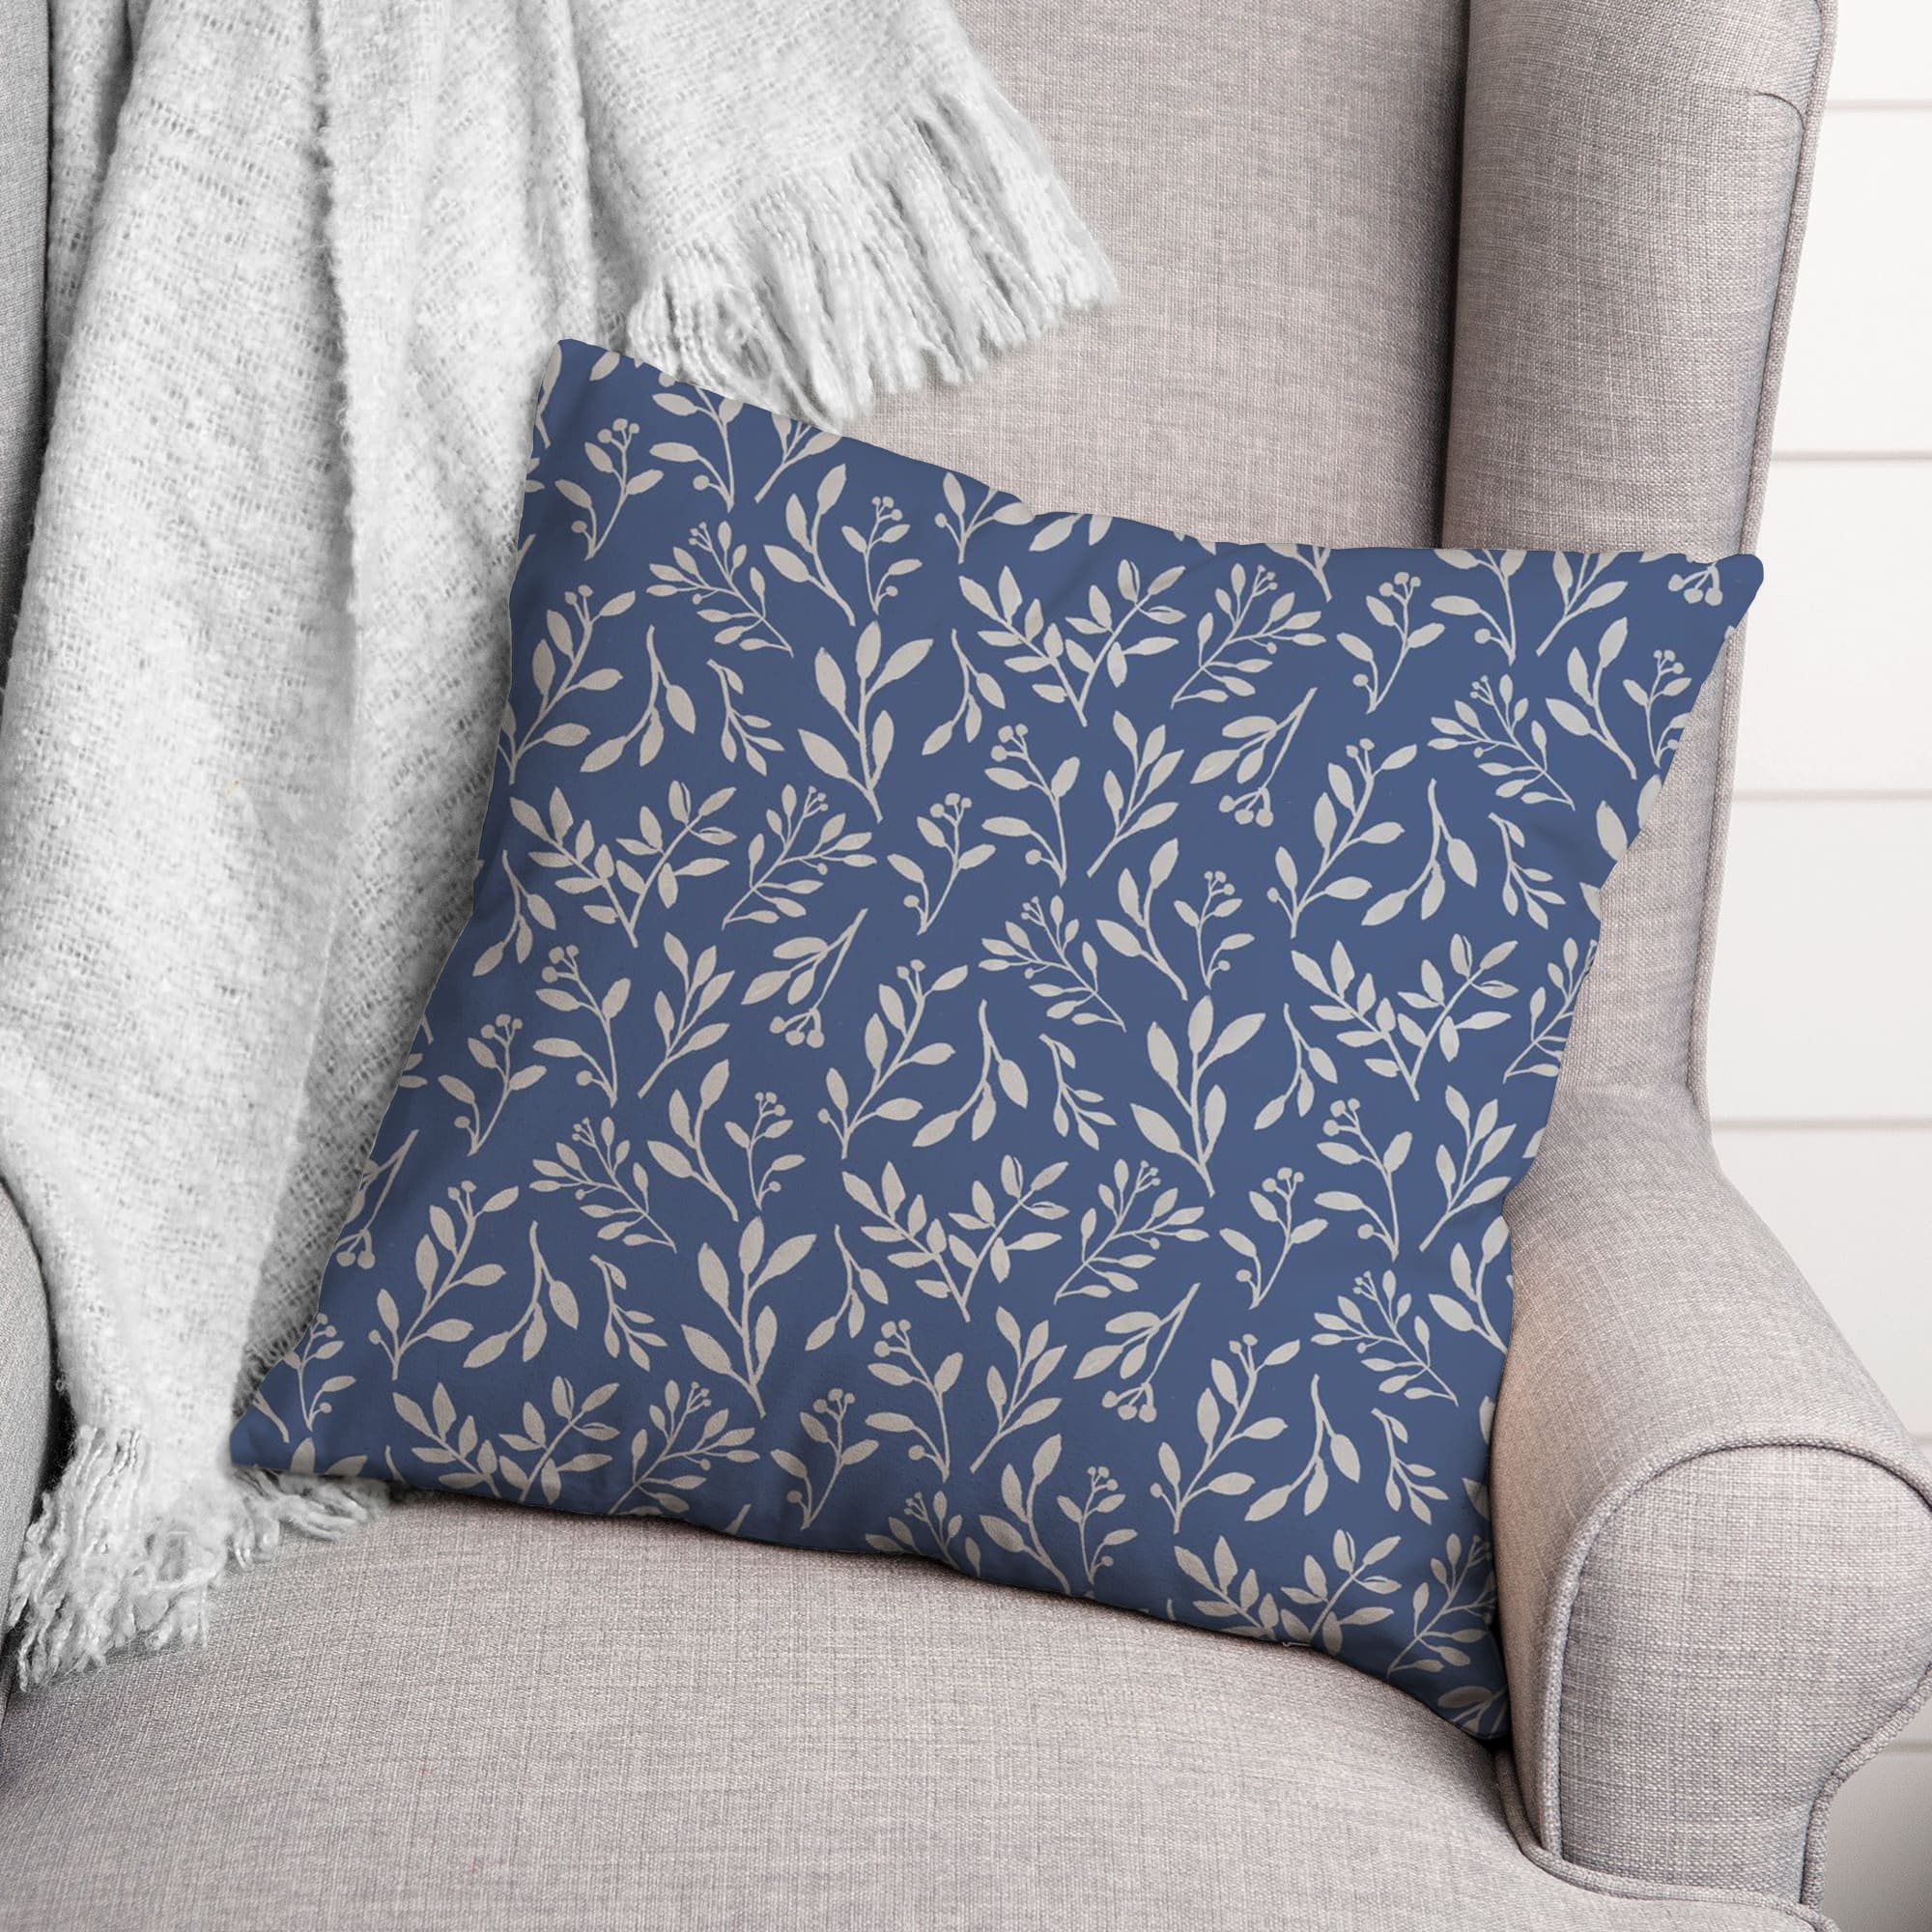 Delicate Floral Throw Pillow